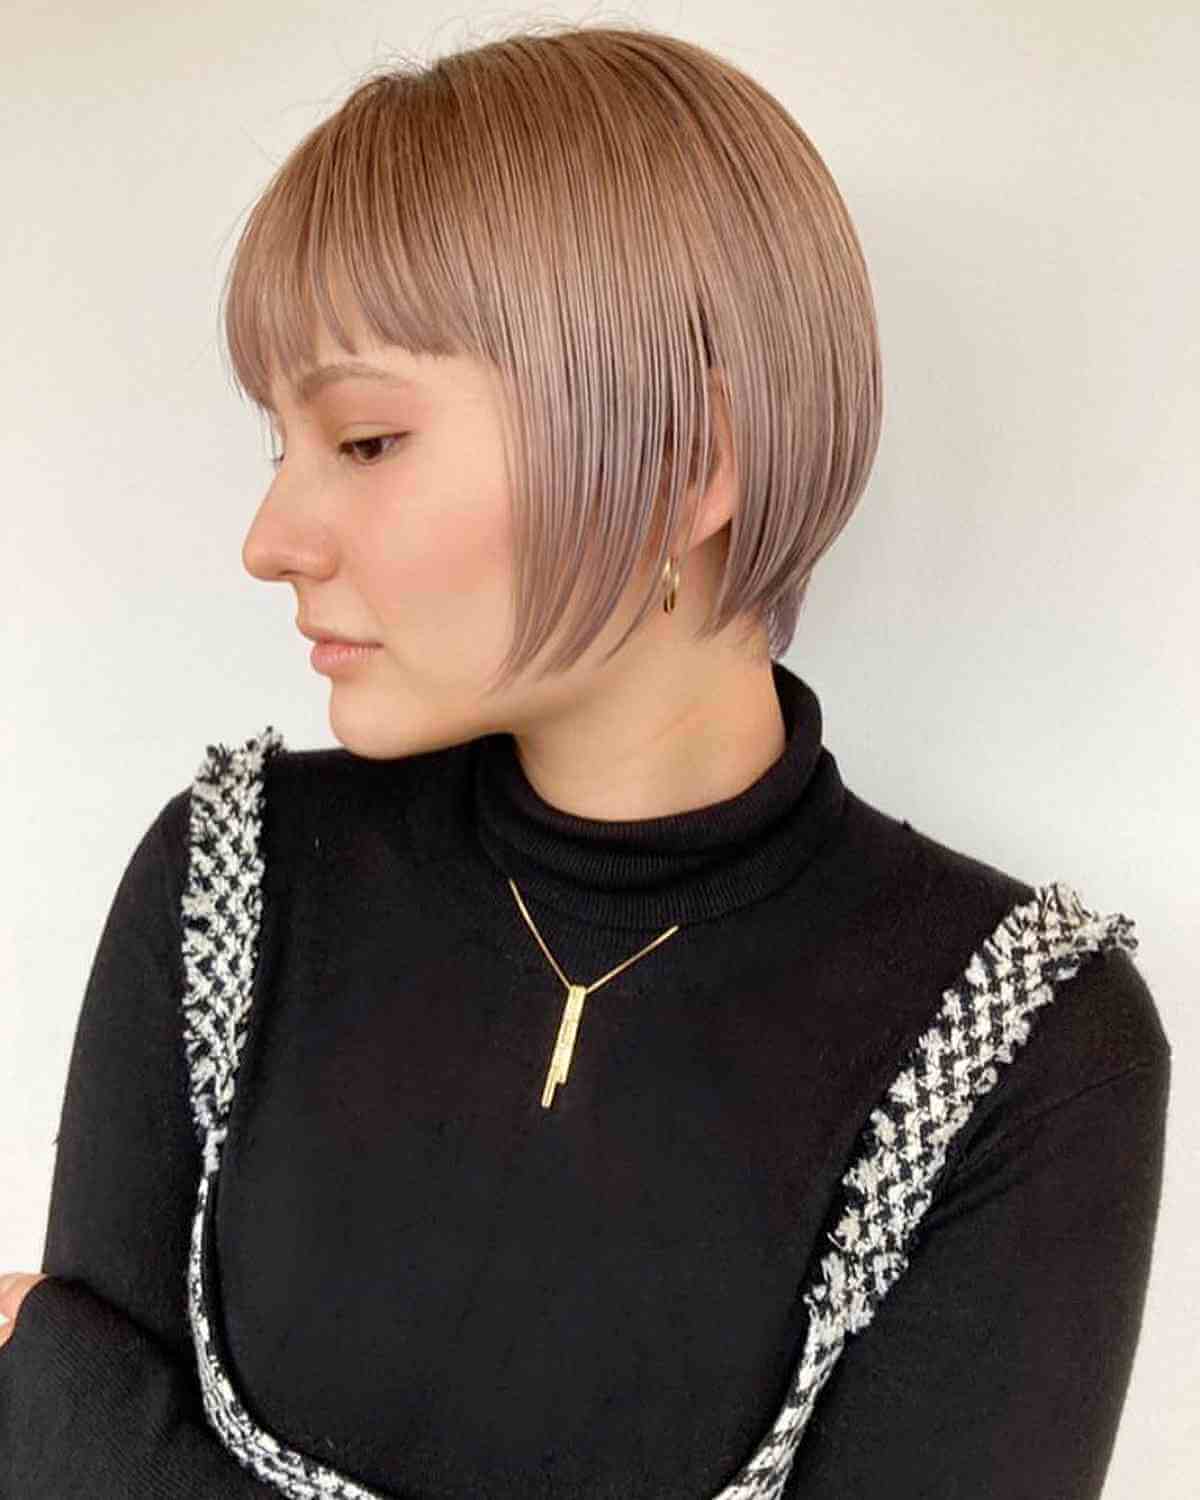 Sleek Stacked Bob with Wispy Bangs with Finer Hair